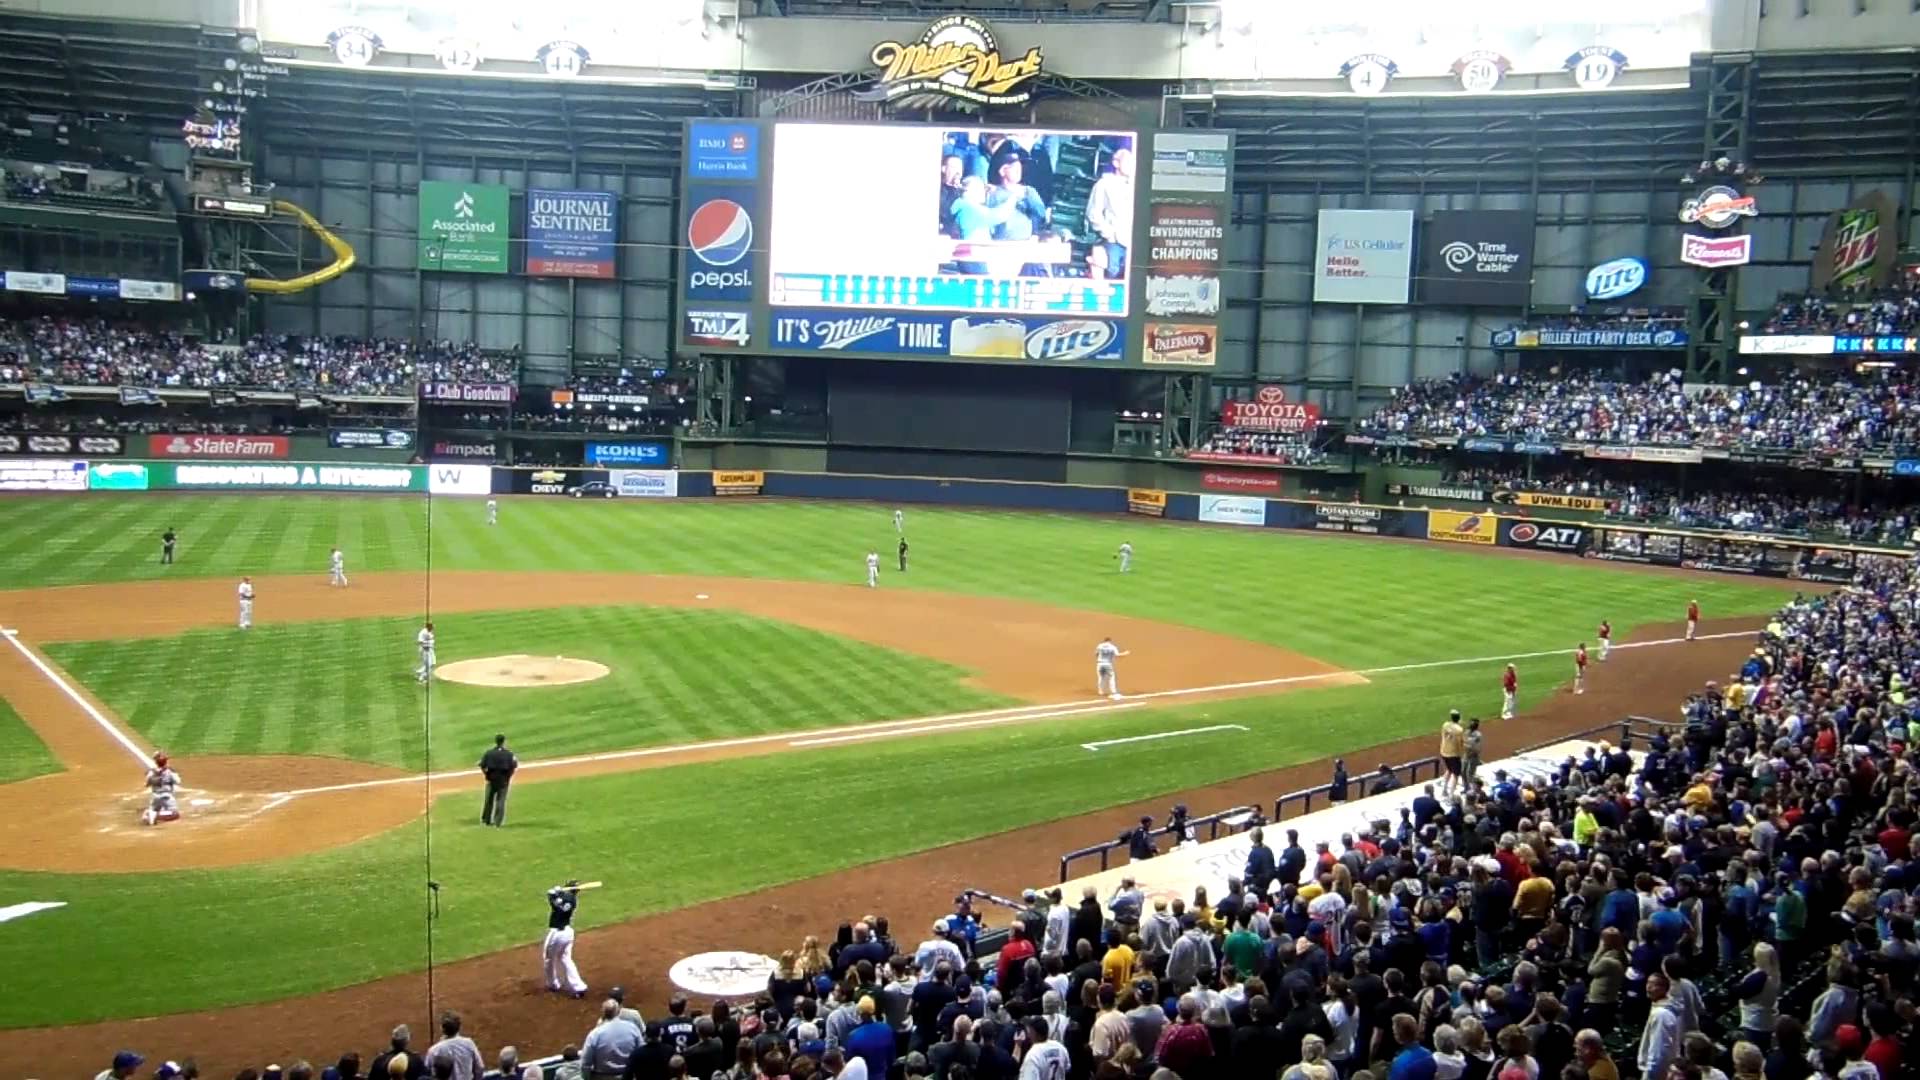 Roll out the barrel, it's the 7th inning polka at Miller Park ...